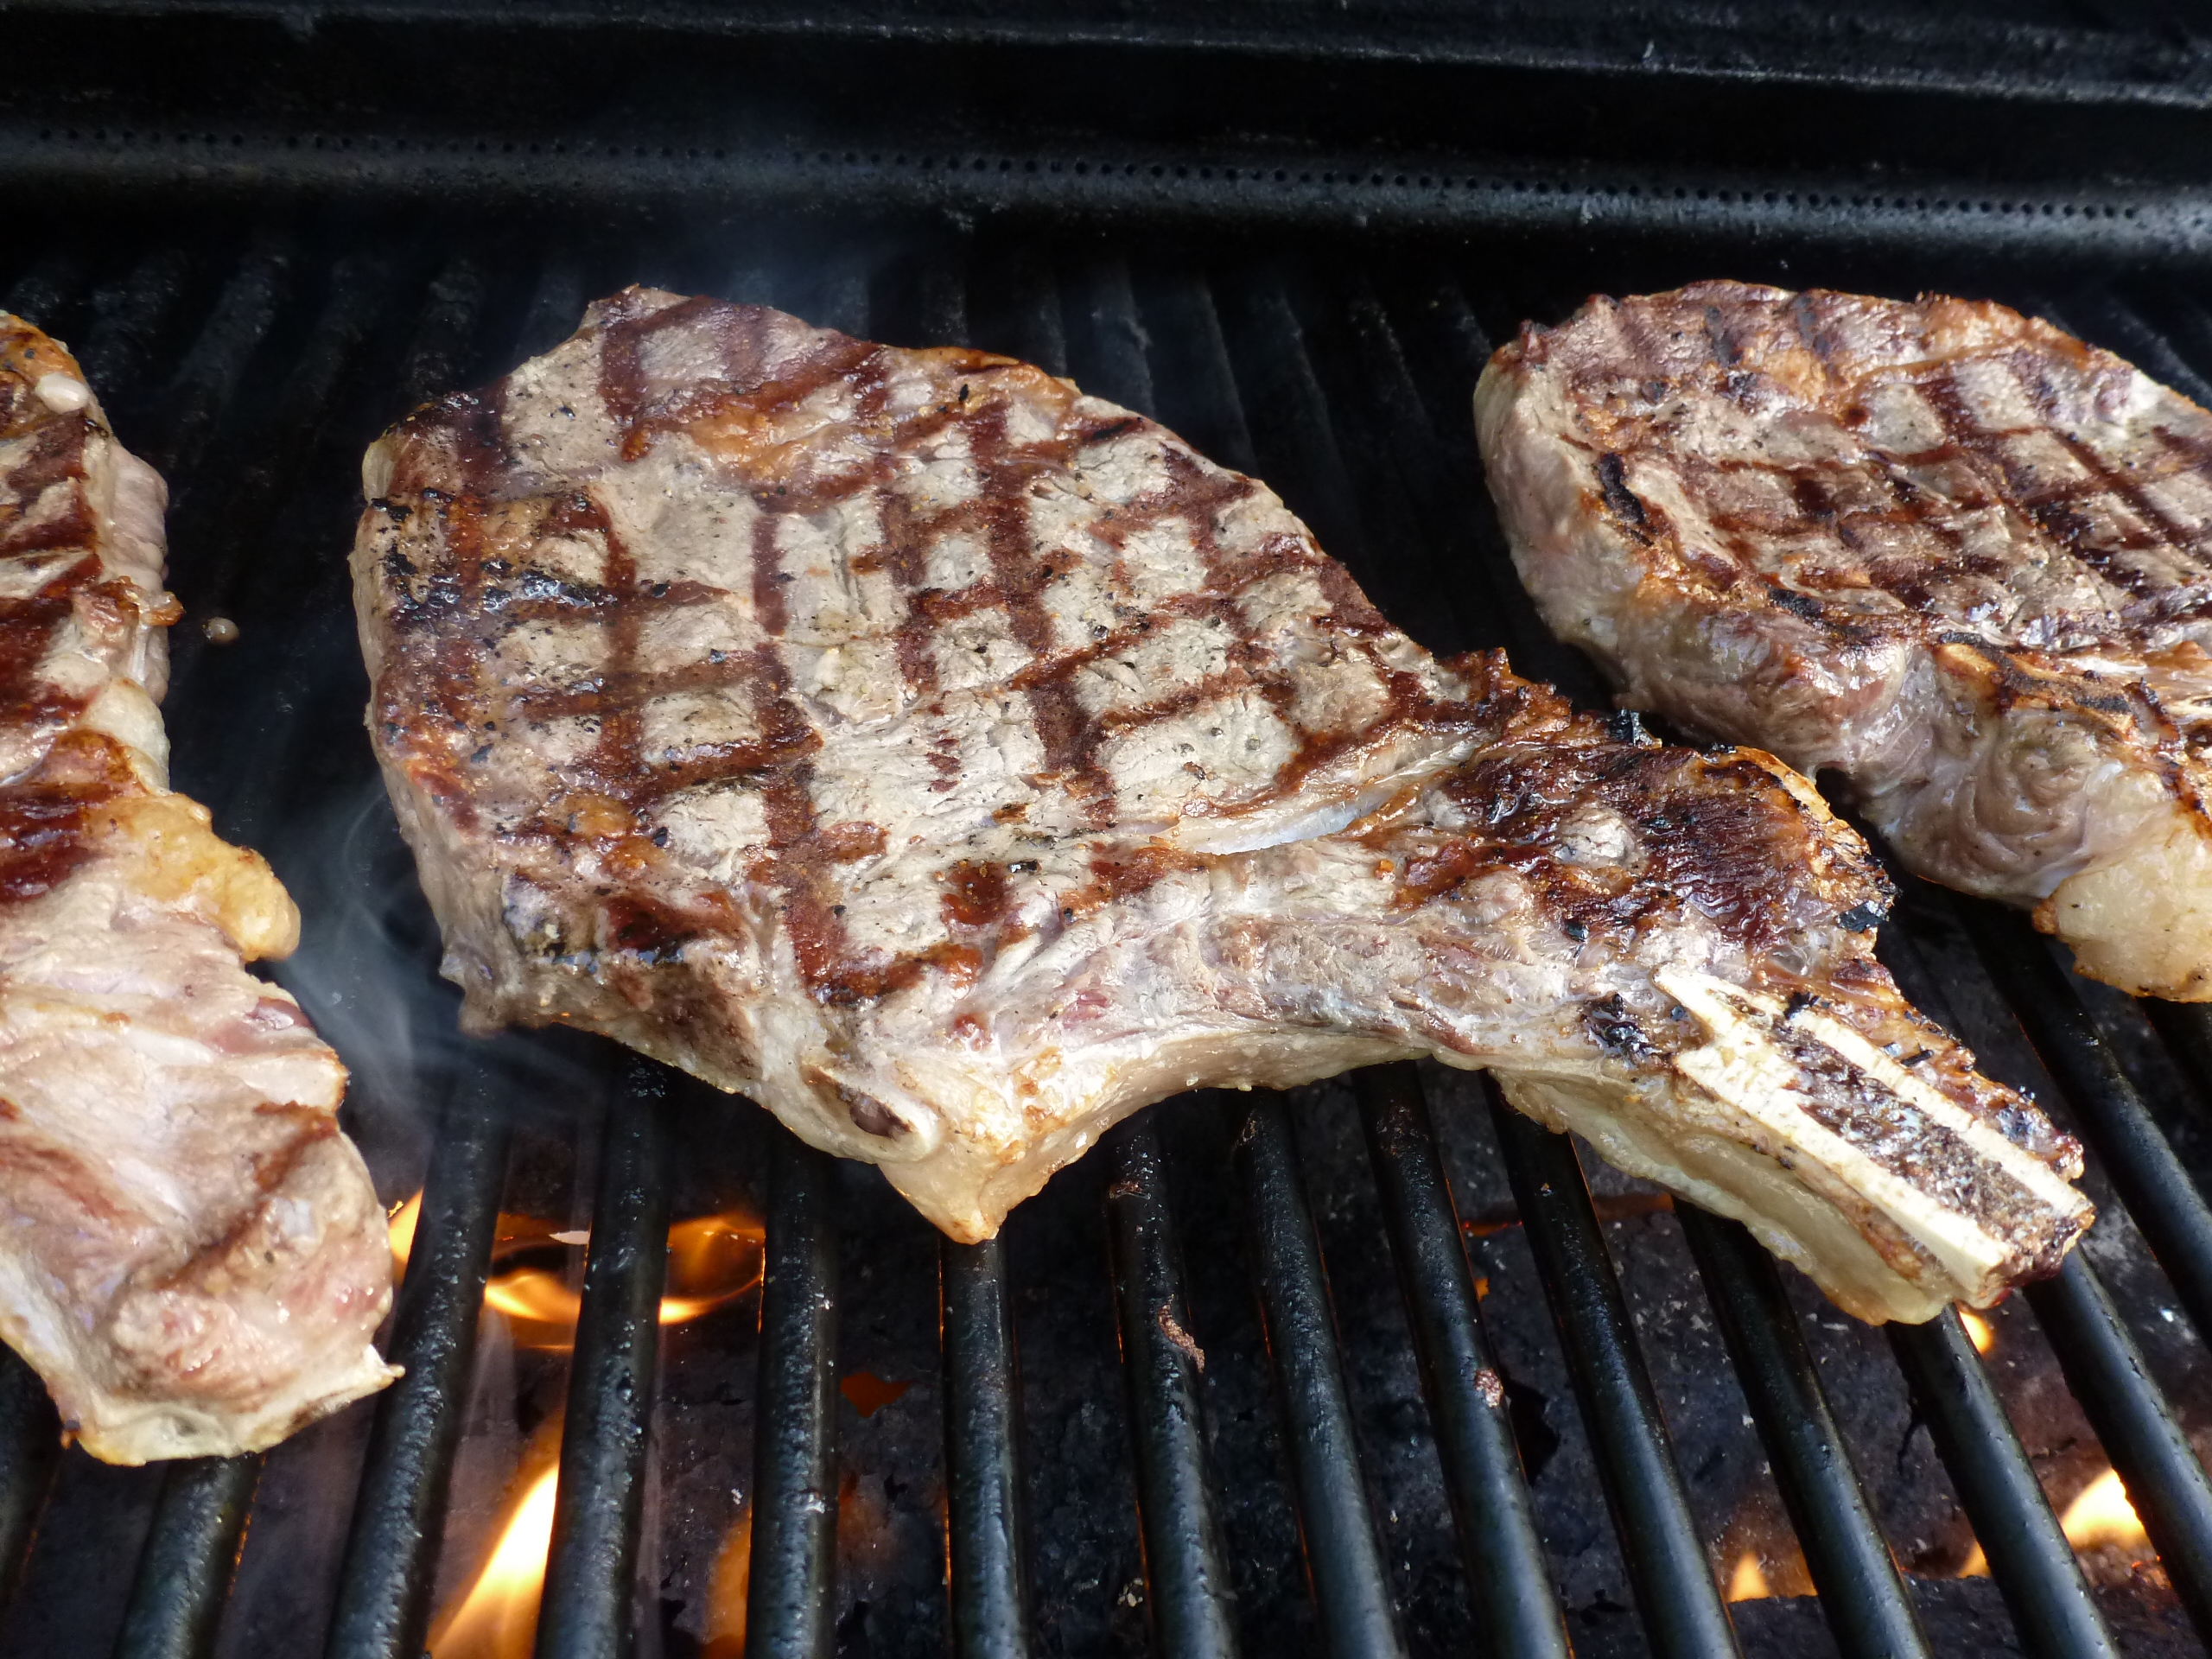 Rib steaks on the grill